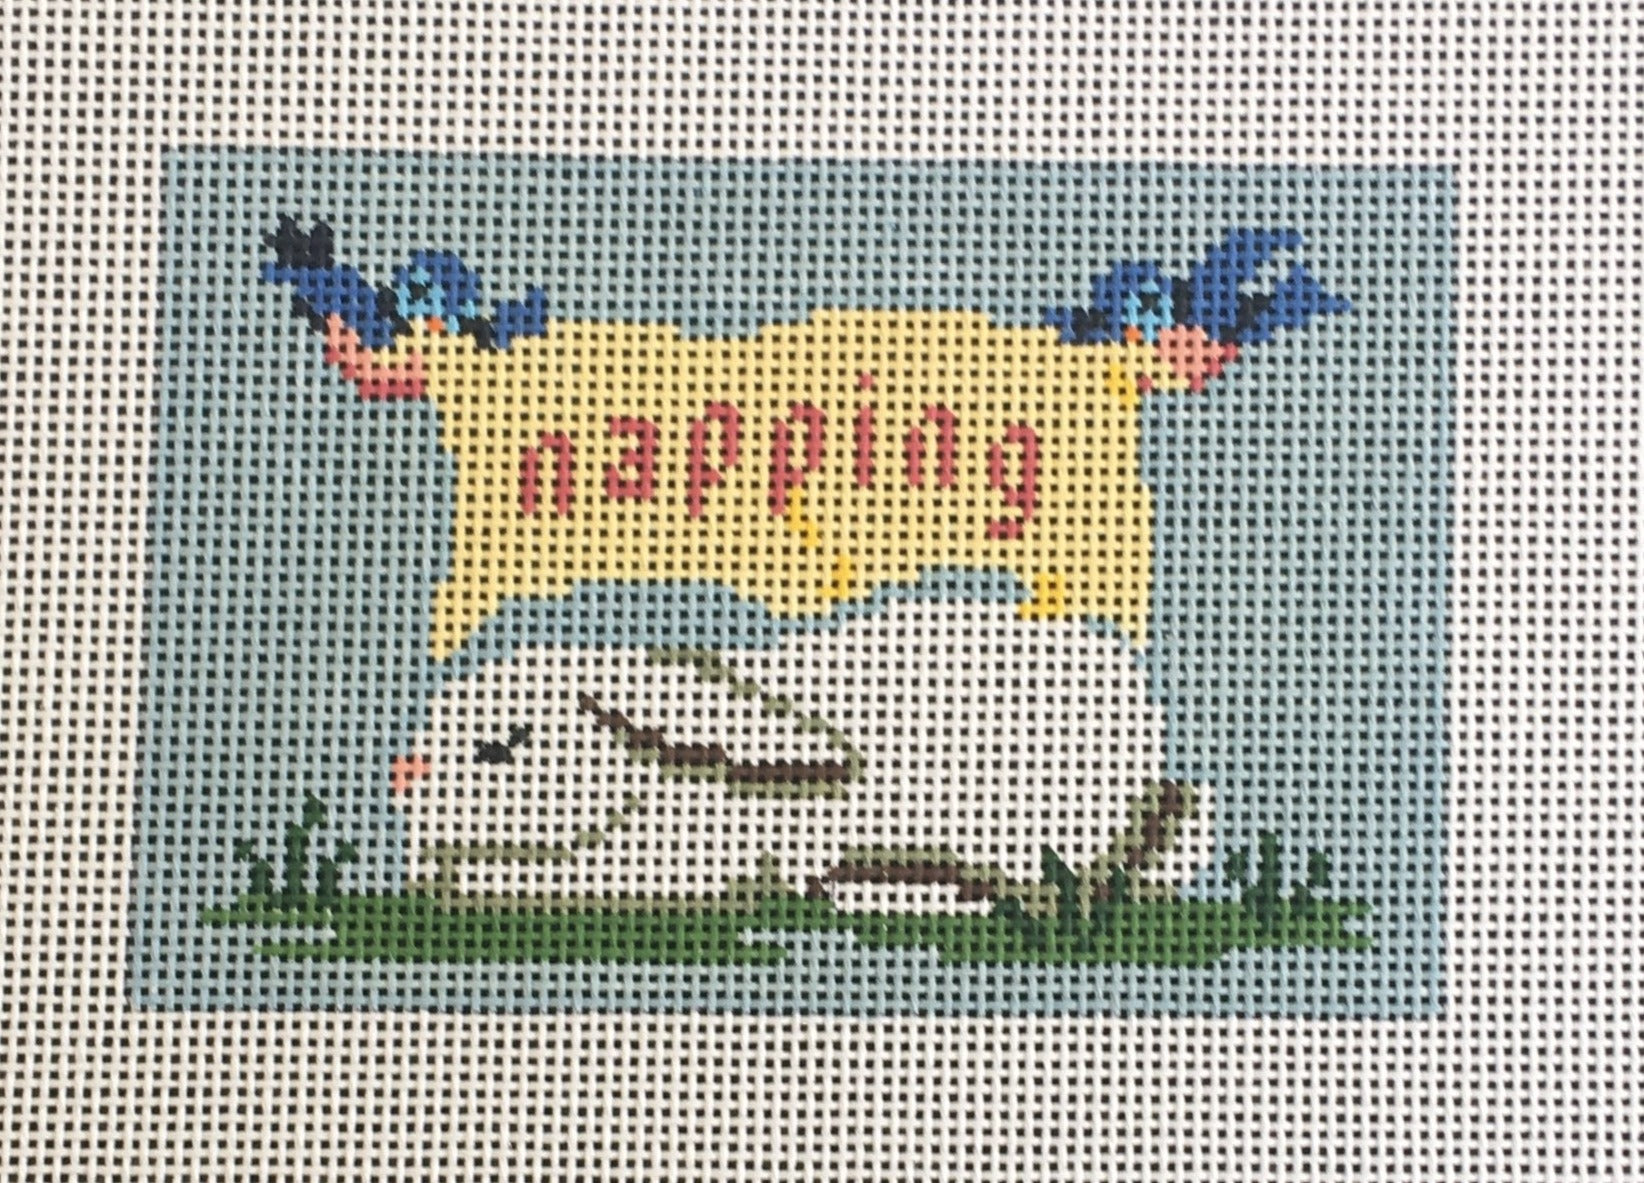 Susan Roberts needlepoint canvas sign for a child sleeping. Shows a sleeping bunny laying in the grass with two birds flying above holding a banner that says "napping"